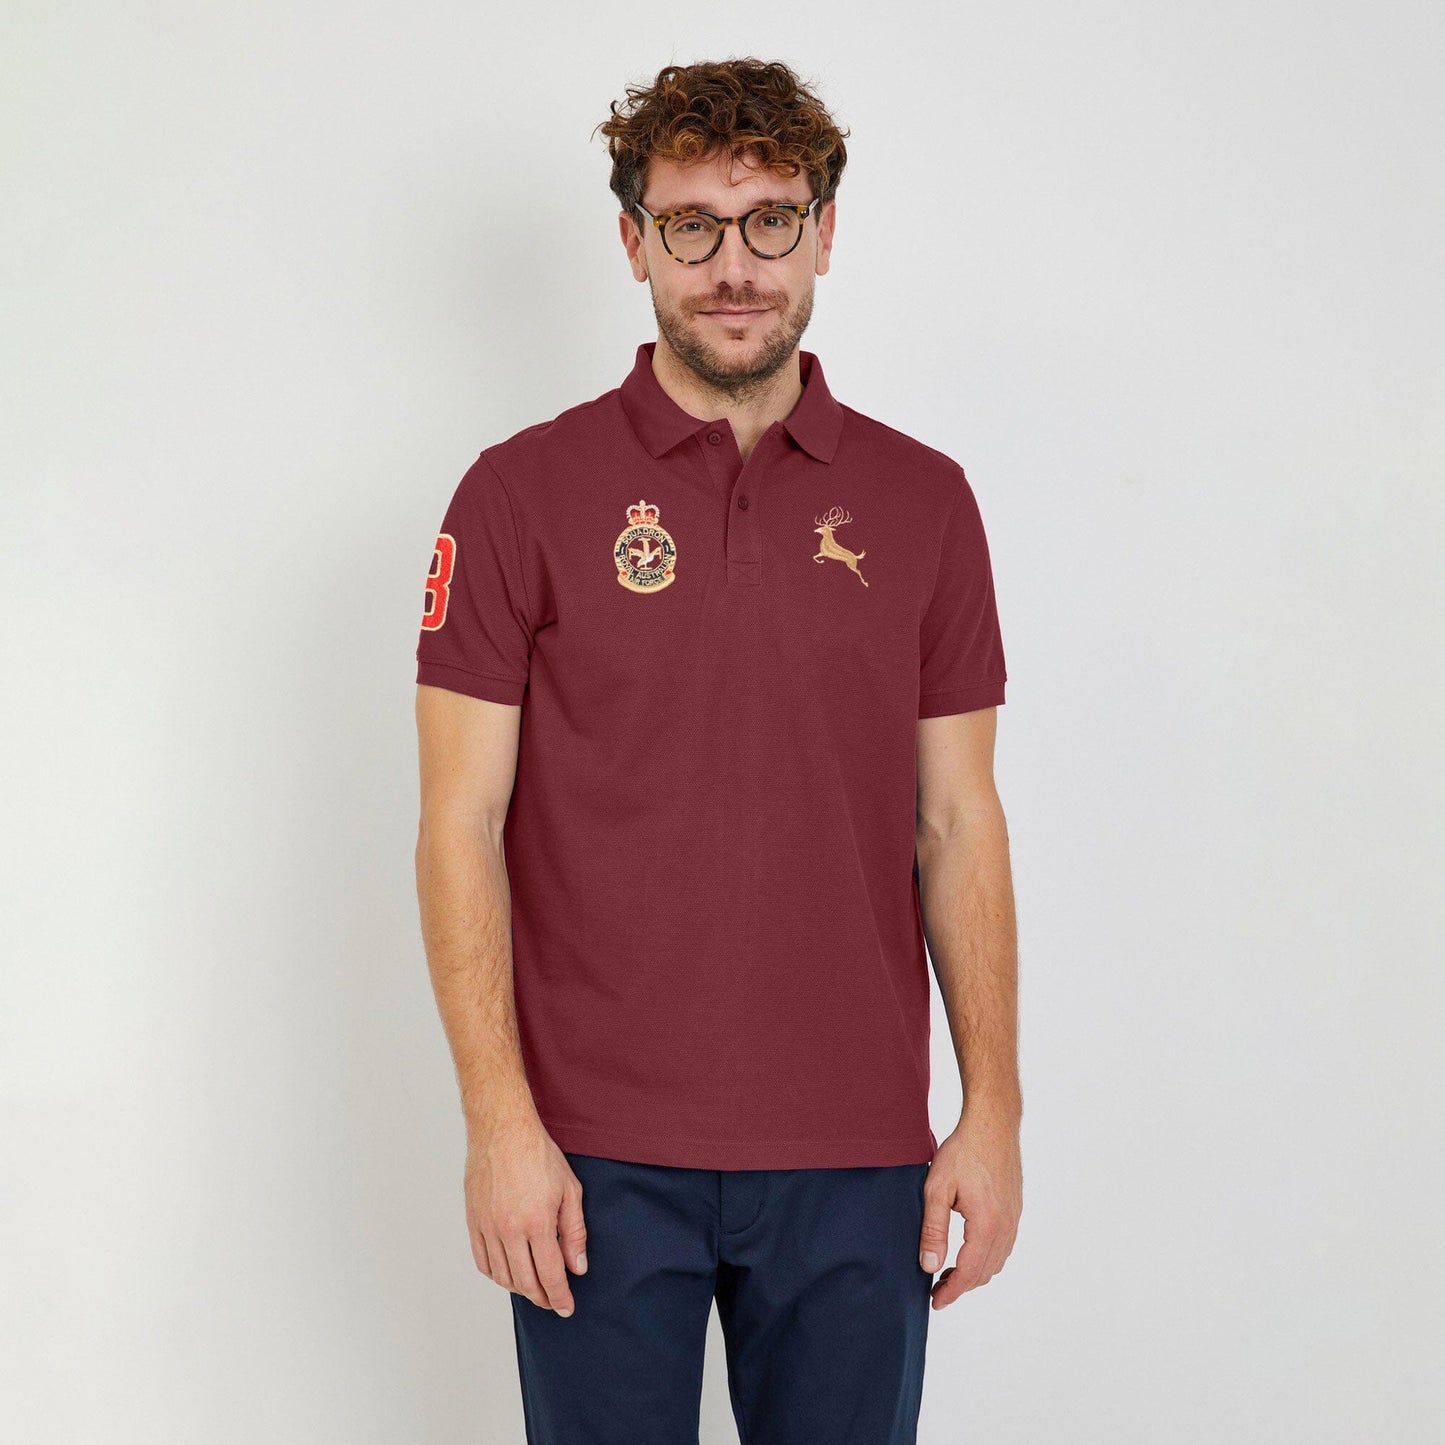 Polo Republica Men's Moose Crest & 8 Embroidered Short Sleeve Polo Shirt Men's Polo Shirt Polo Republica Maroon S 